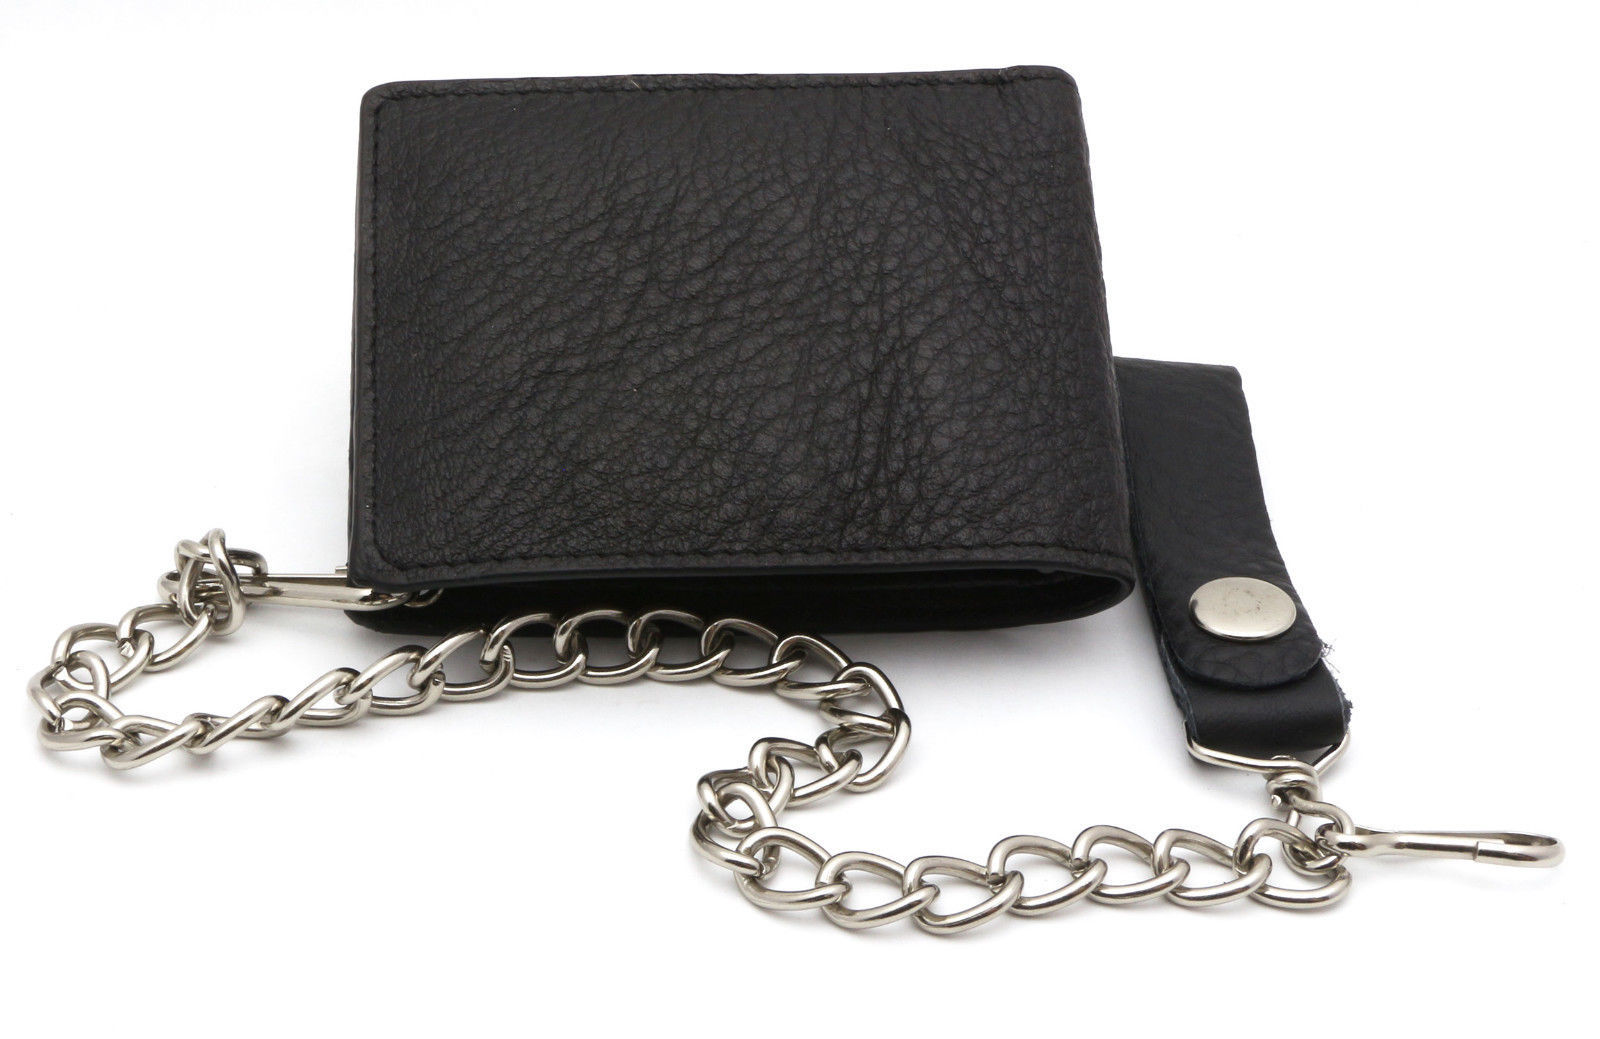 Bifold Black Genuine Leather Wallet with Scale Texture Design with a Chain - Wallets